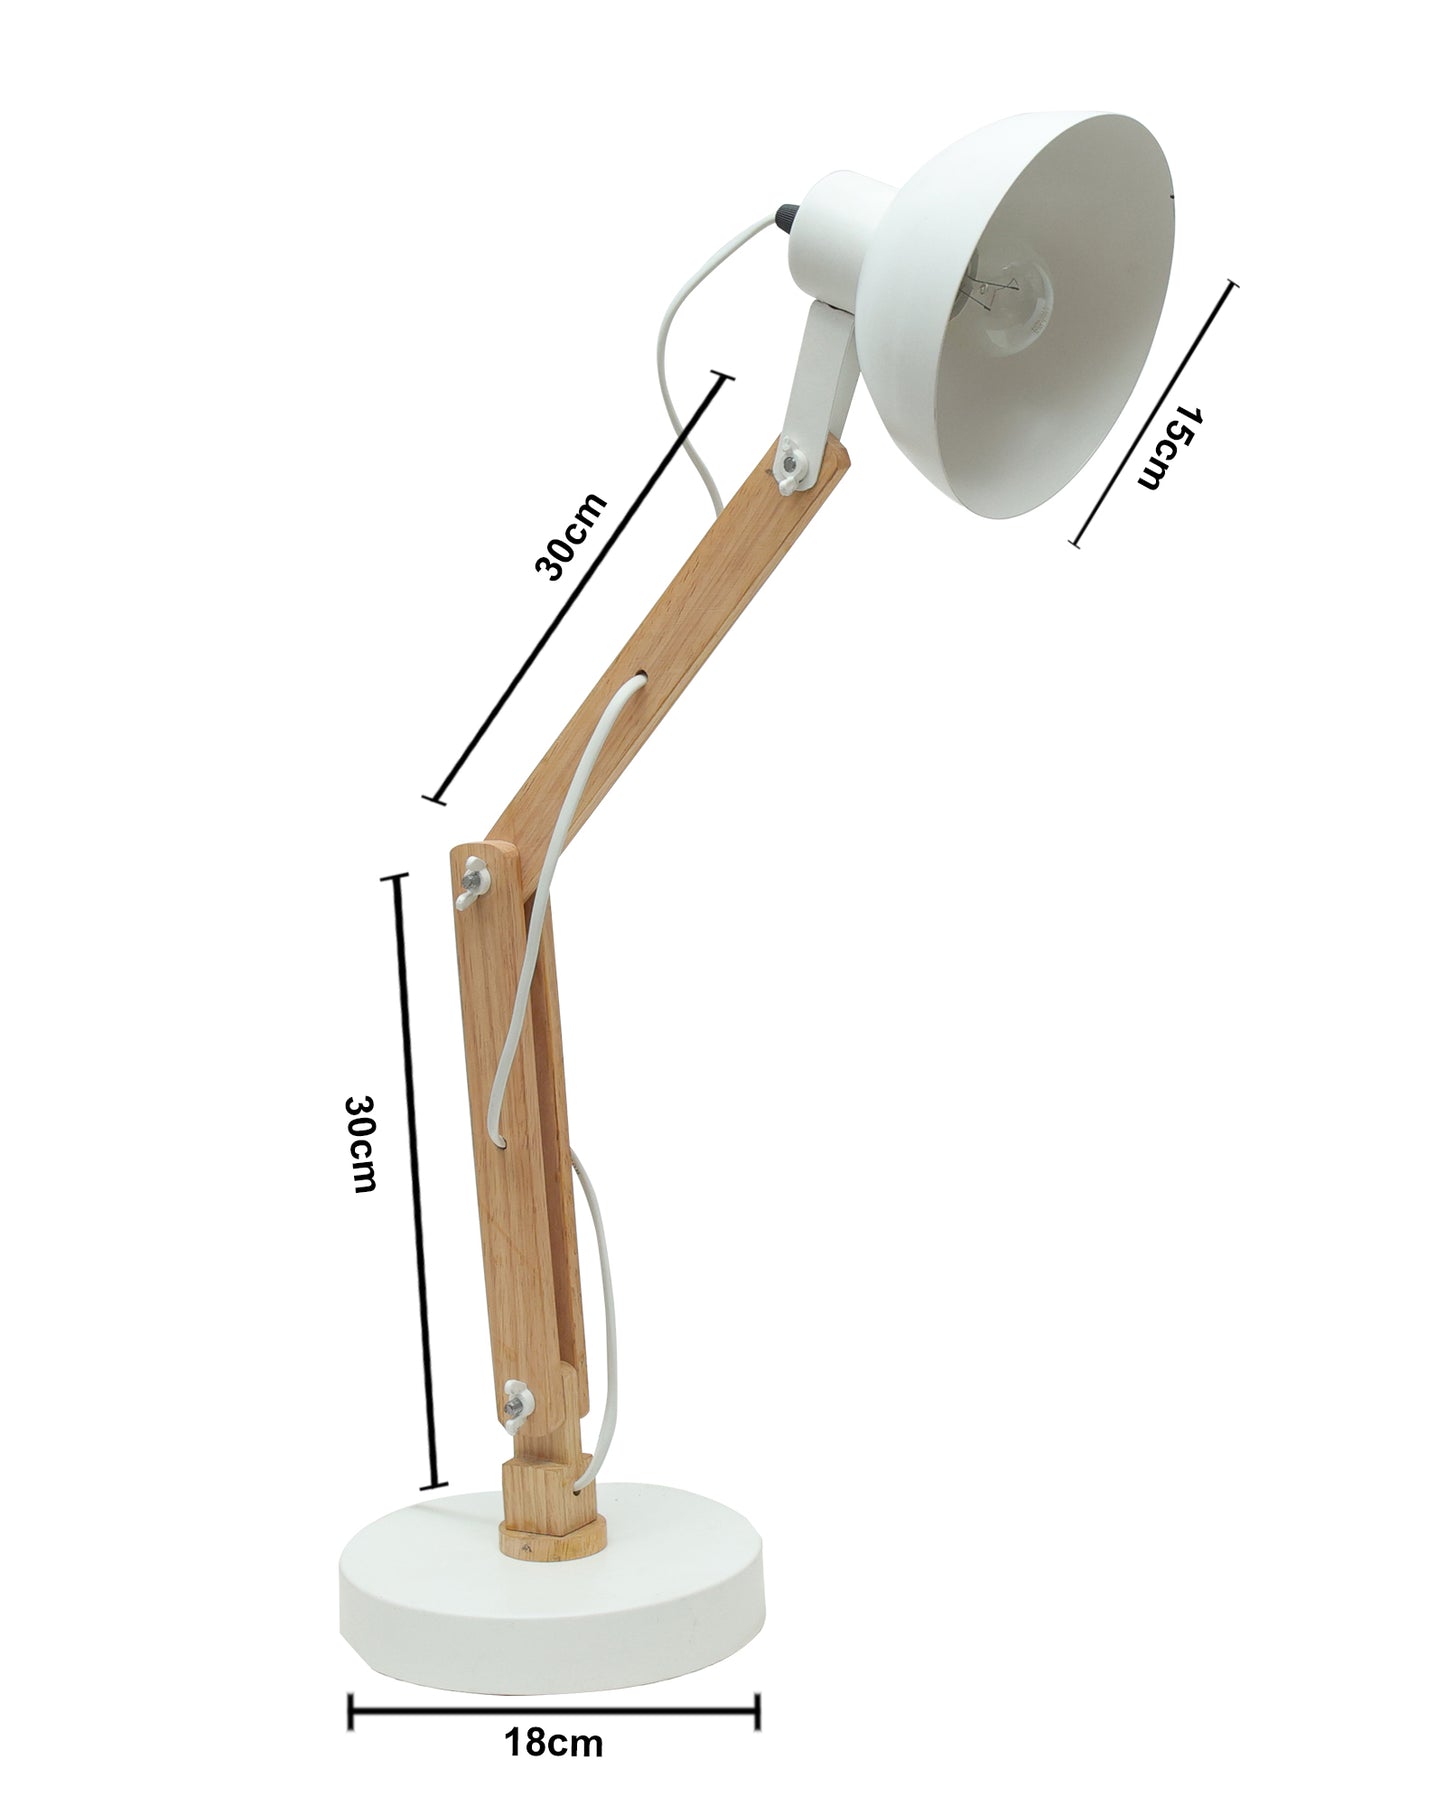 Wood Metal Desk Lamp, Swing Arm Desk Lamp, Adjustable Architect Study Table Lamp, Reading Lamp for Home, Office, Multi-Joint